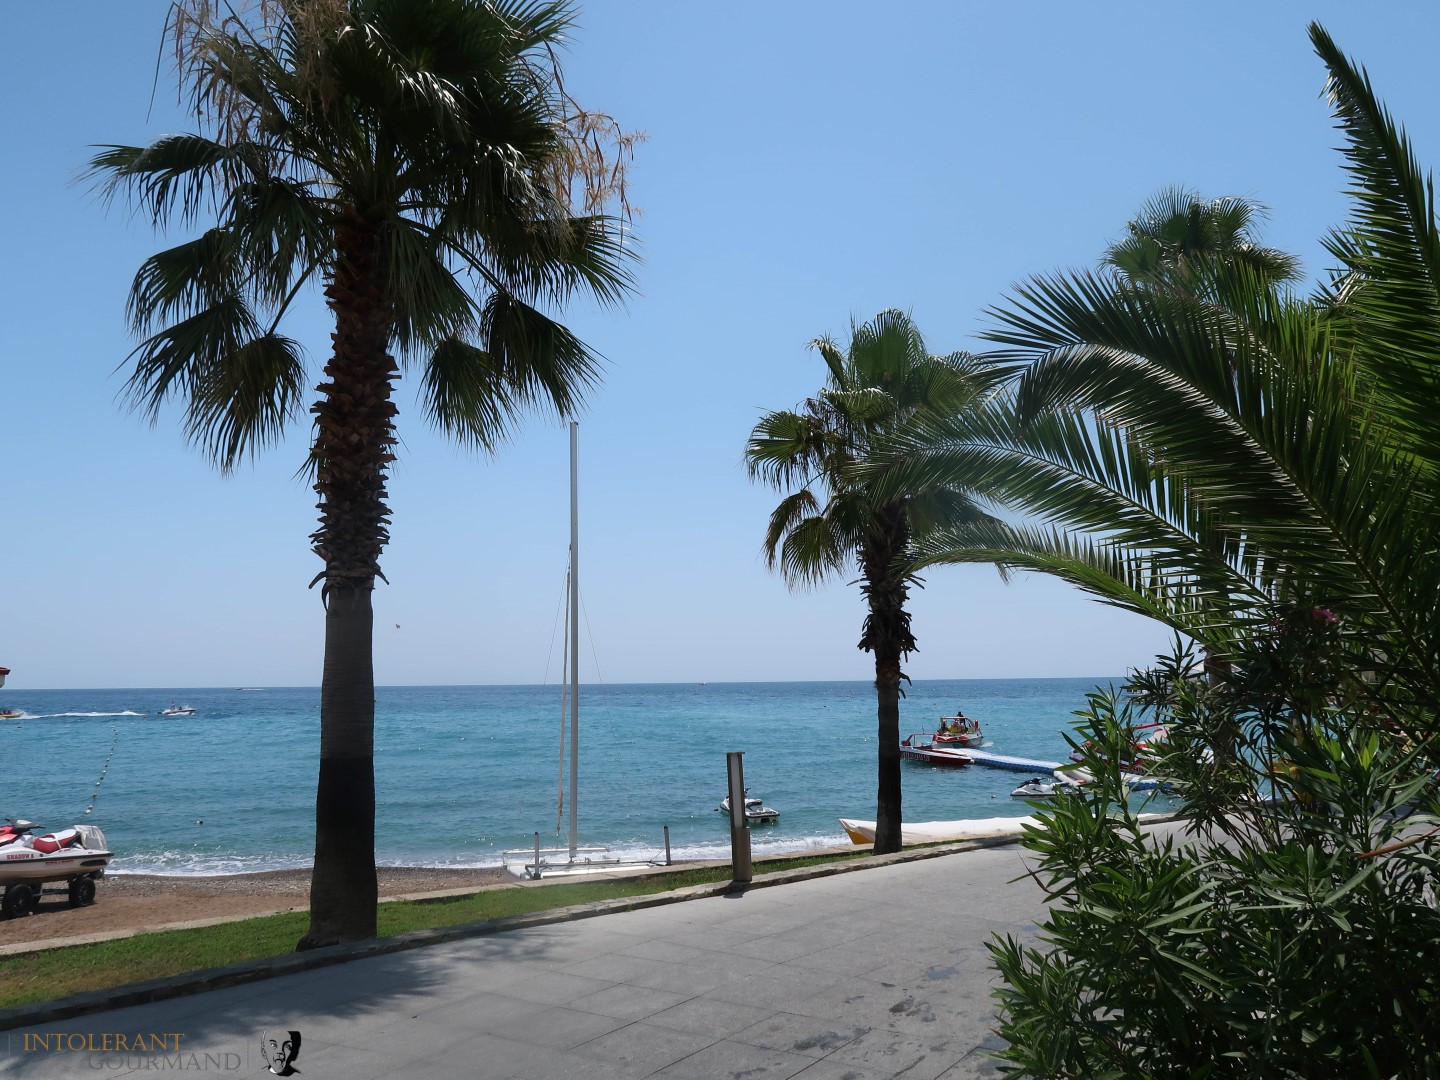 Rixos Sungate Kemer Antalya with Jet 2 Holidays - beach photo, palm trees, and blue skies with the sea in the background. www.intolerantgourmand.com